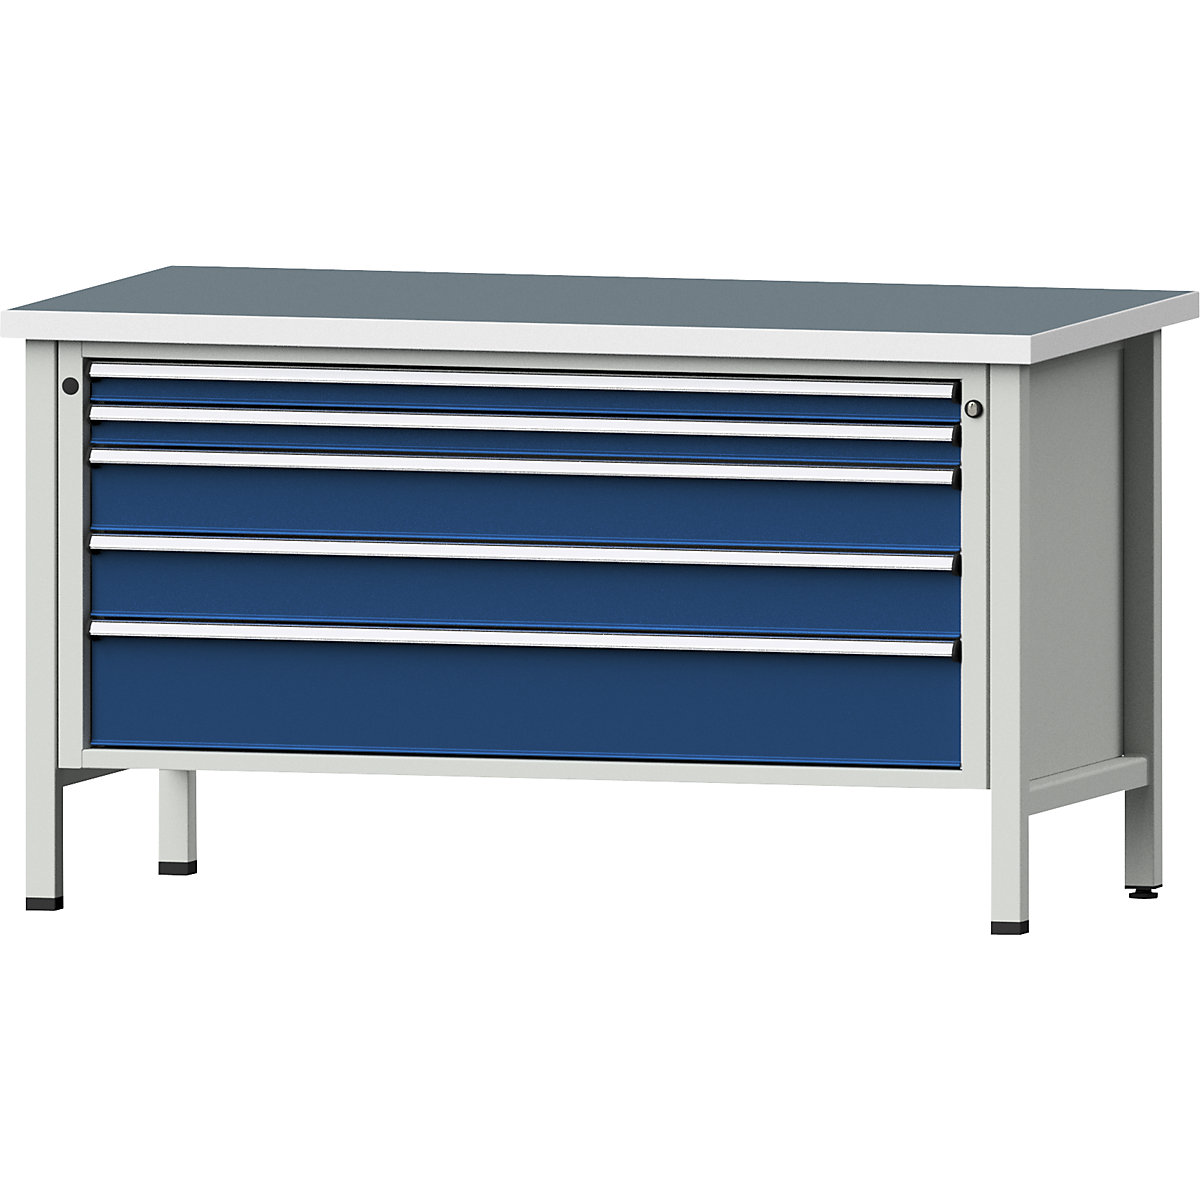 Workbench with XL/XXL drawers, frame construction – ANKE, width 1500 mm, 5 drawers, universal worktop, front in gentian blue-12